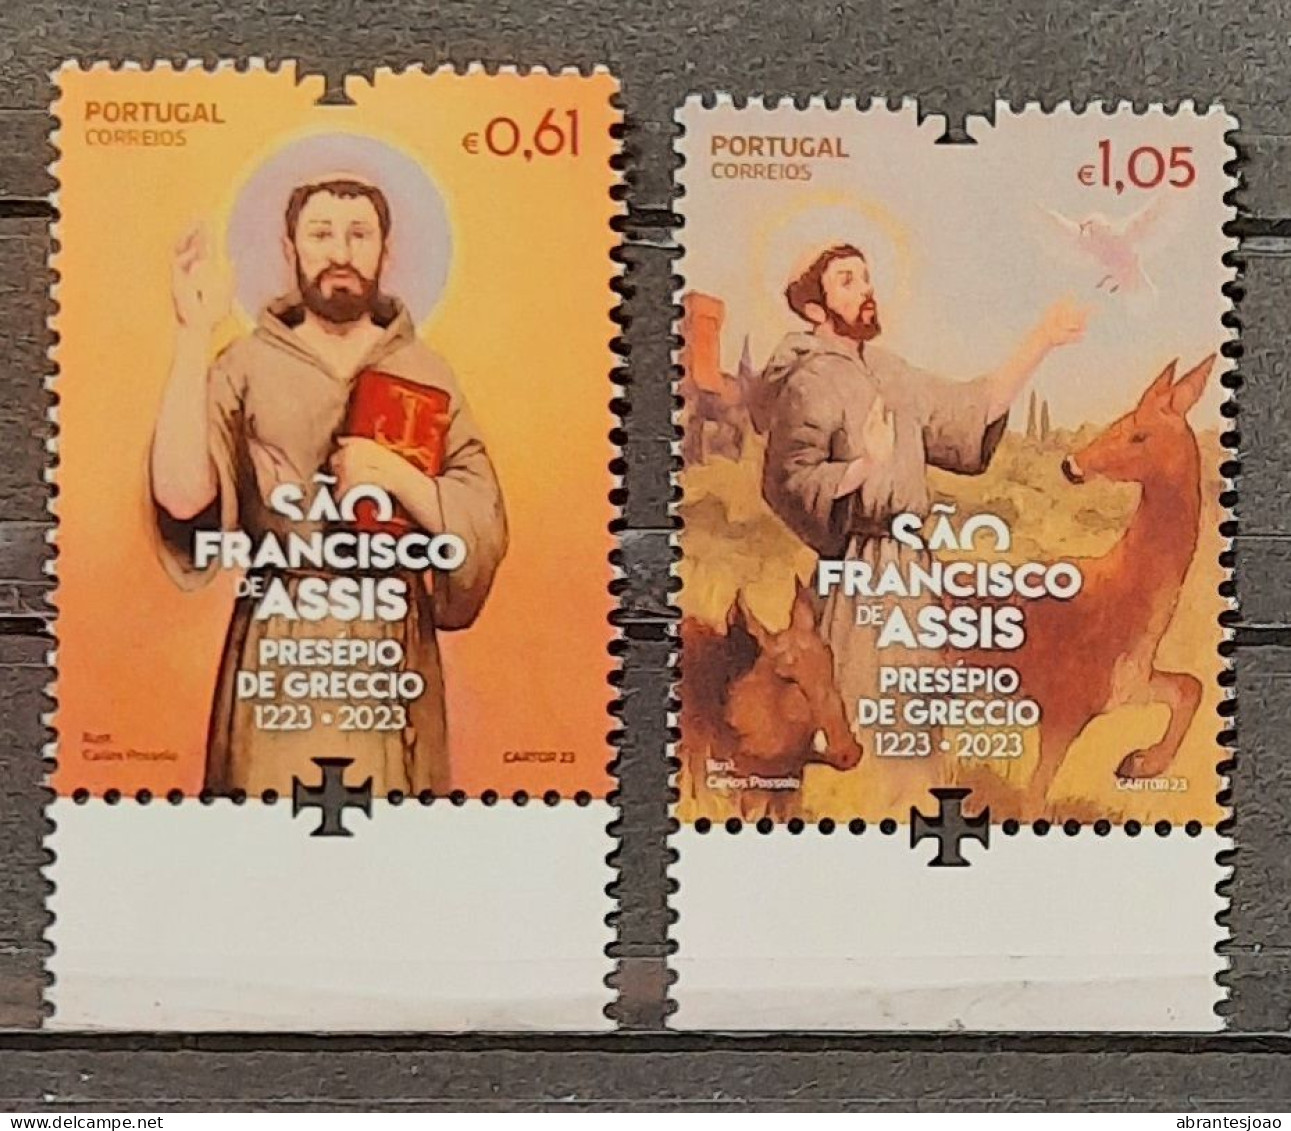 2023 - Portugal - MNH - Saint Francis Of Assis - Presepius Of Greccio - 1223/2023 - 2 Stamps + Block Of 1 Stamp - Unused Stamps